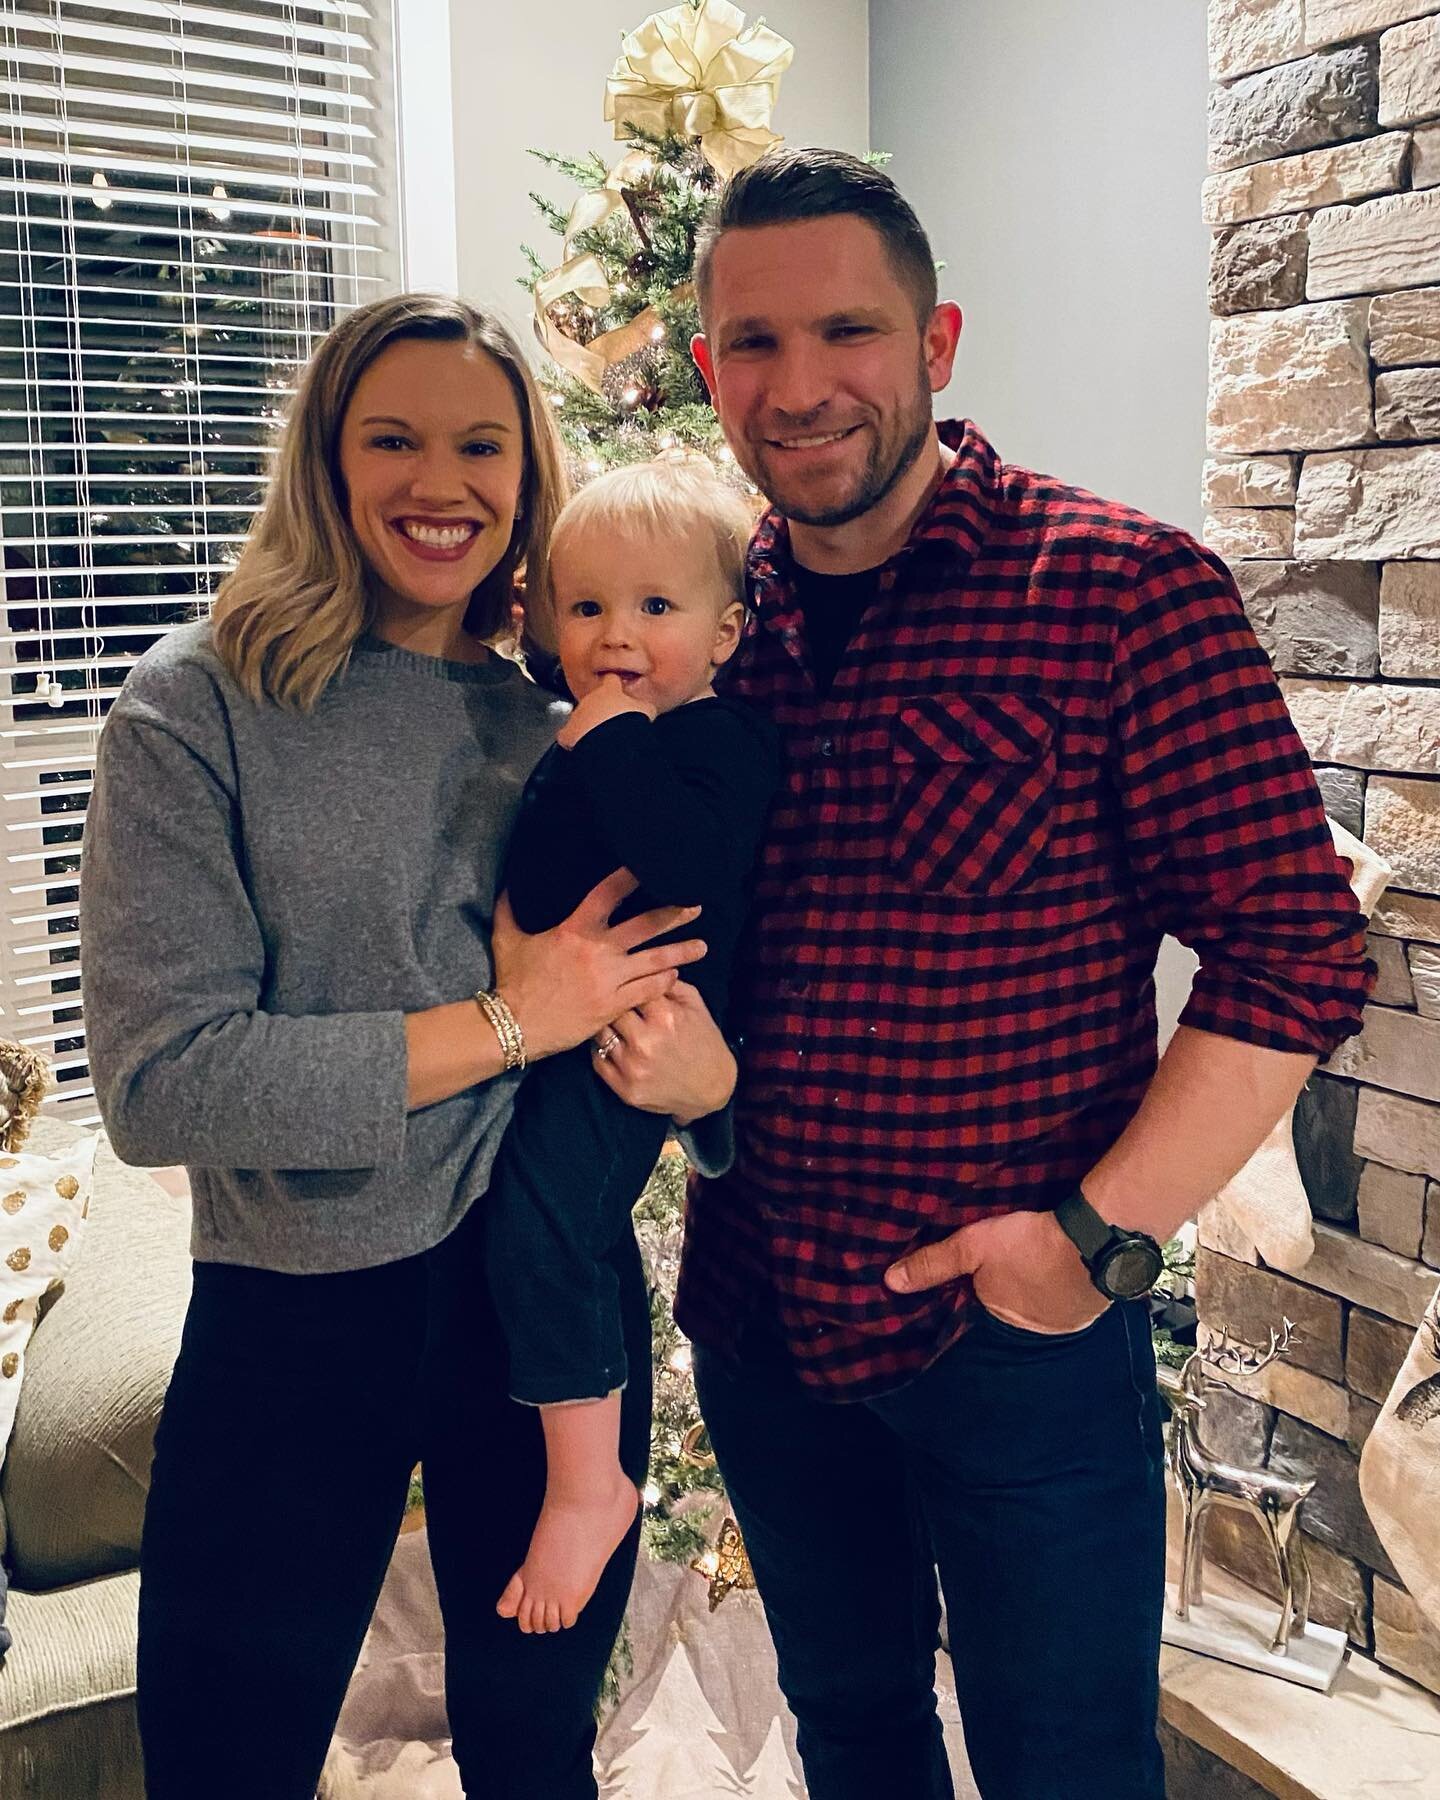 Merry Christmas from the Morris family! 🎄❄️❤️ To all our family and friends near and far, may your holiday season be filled with love, light, and loads of cookies!

And in case you were wondering, trying to catch a picture with a one year old waitin